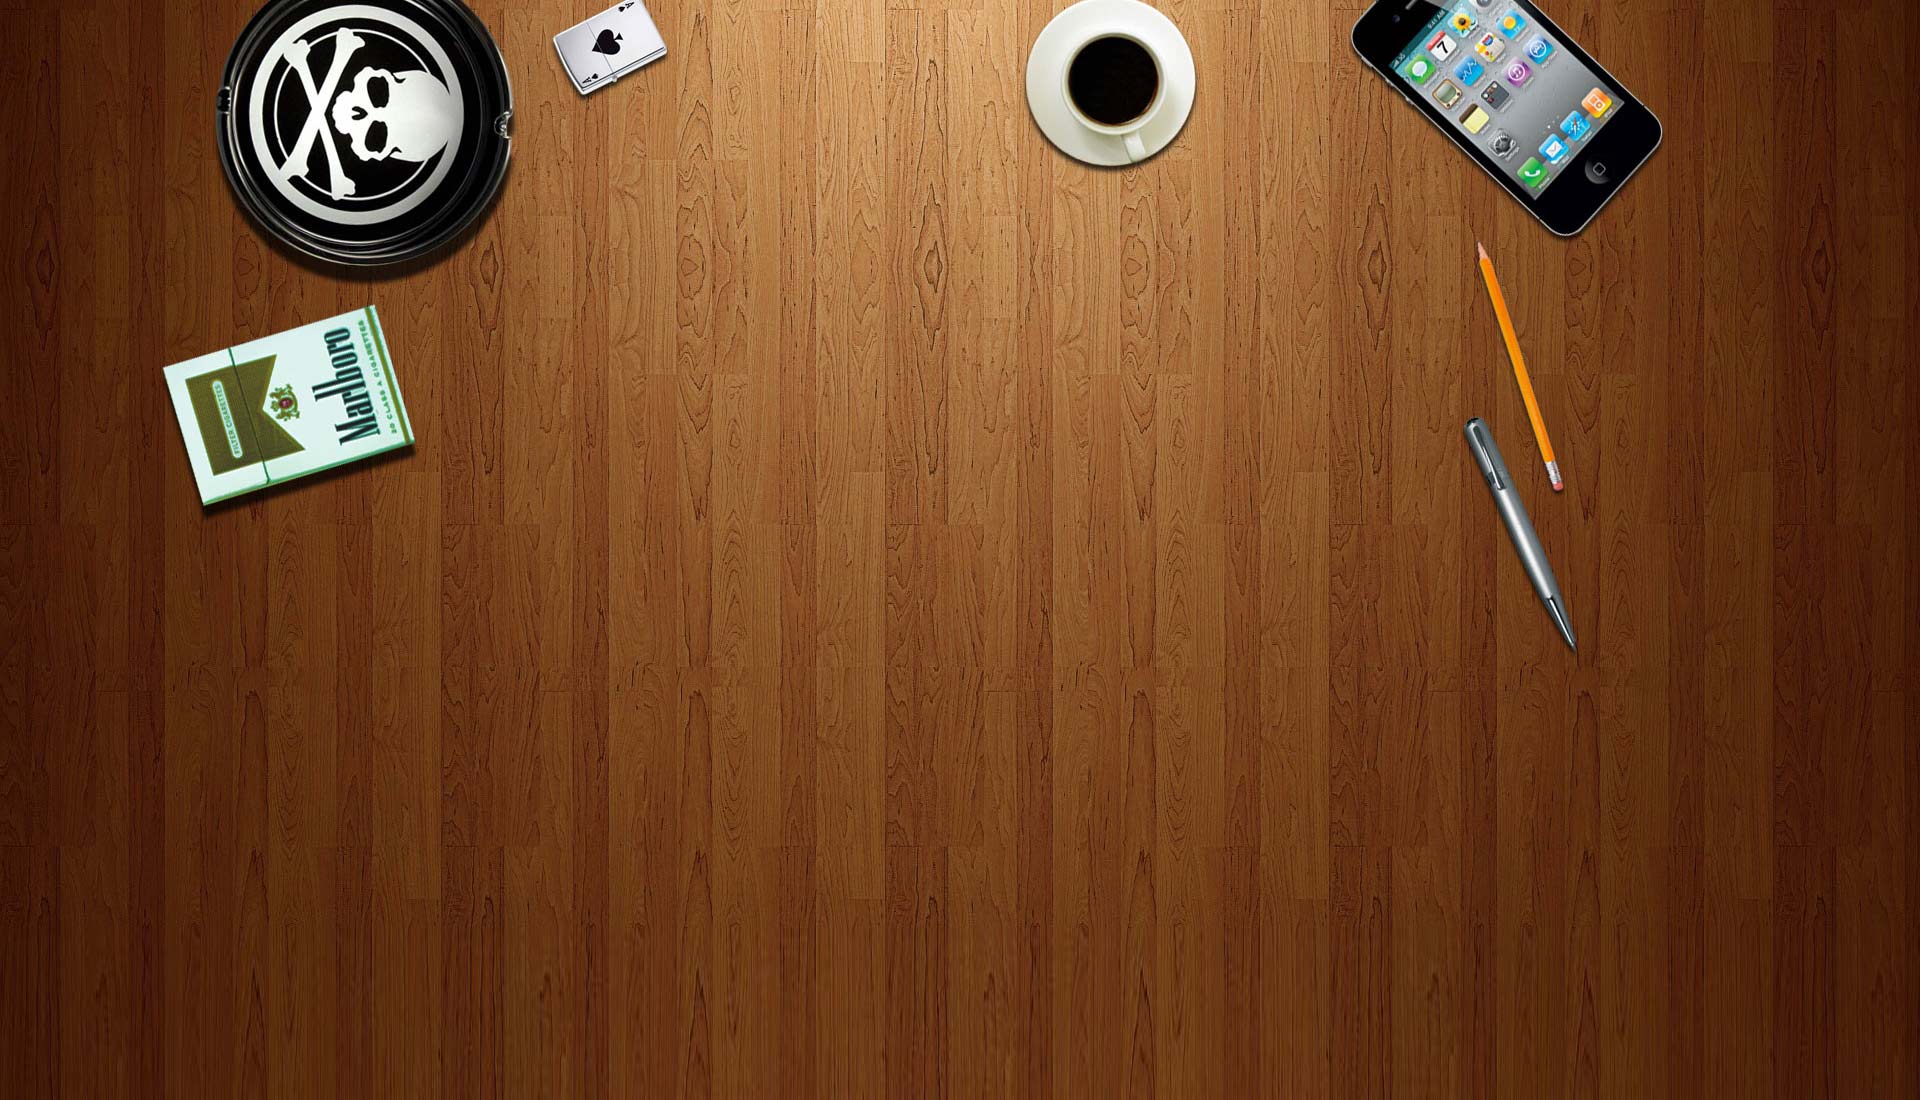 Background Desk Wood Texture Objects Scratch By Archibald Butler On